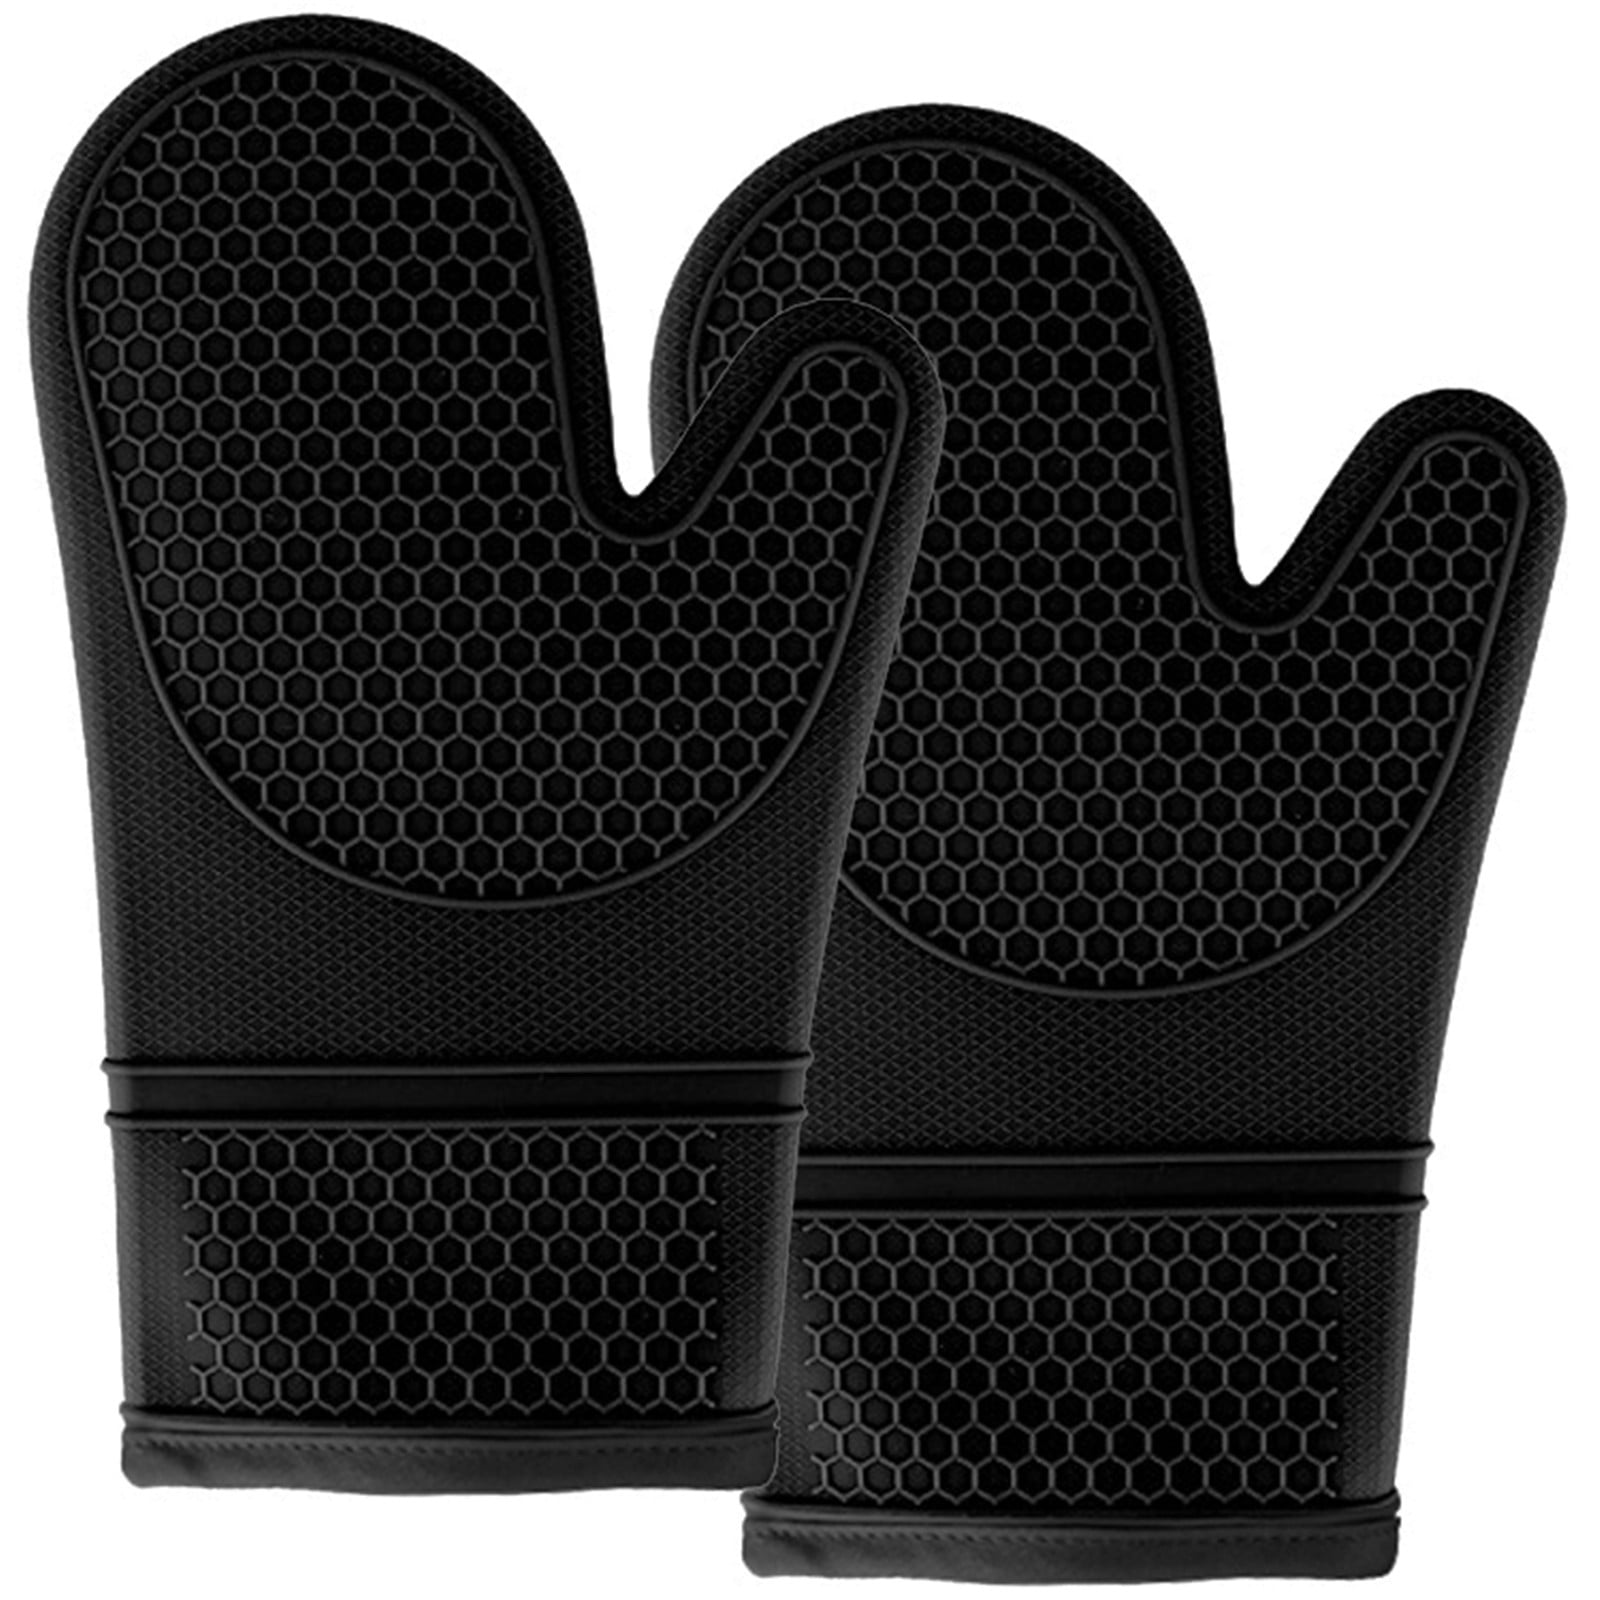 Silicone Oven Mitts Set Black Oven Mitts Heat Resistant 500F - Grippy ...